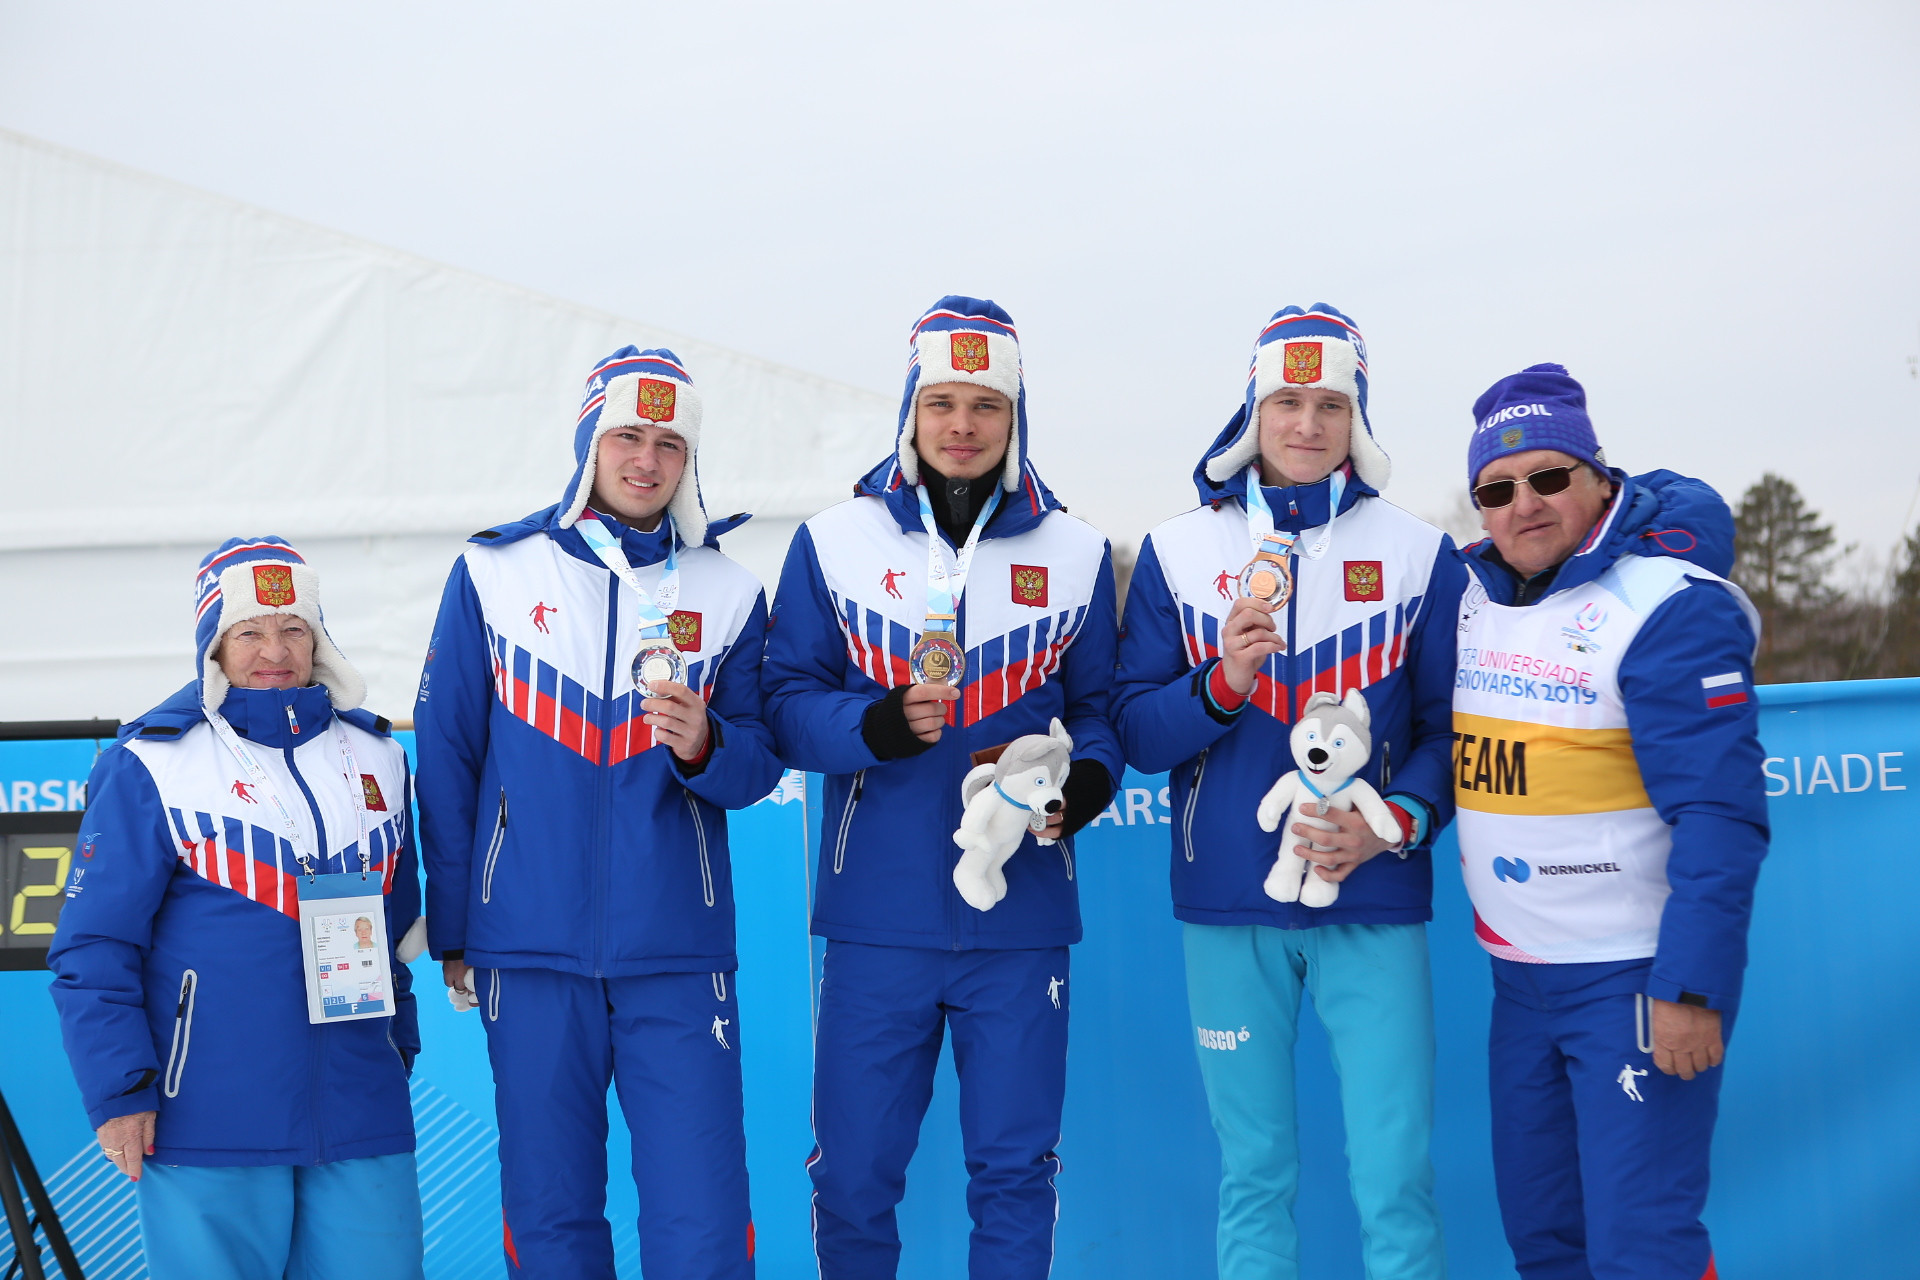 Russia dominated in today's cross-country skiing, securing a clean sweep in both the men's and women's events ©Krasnoyarsk 2019